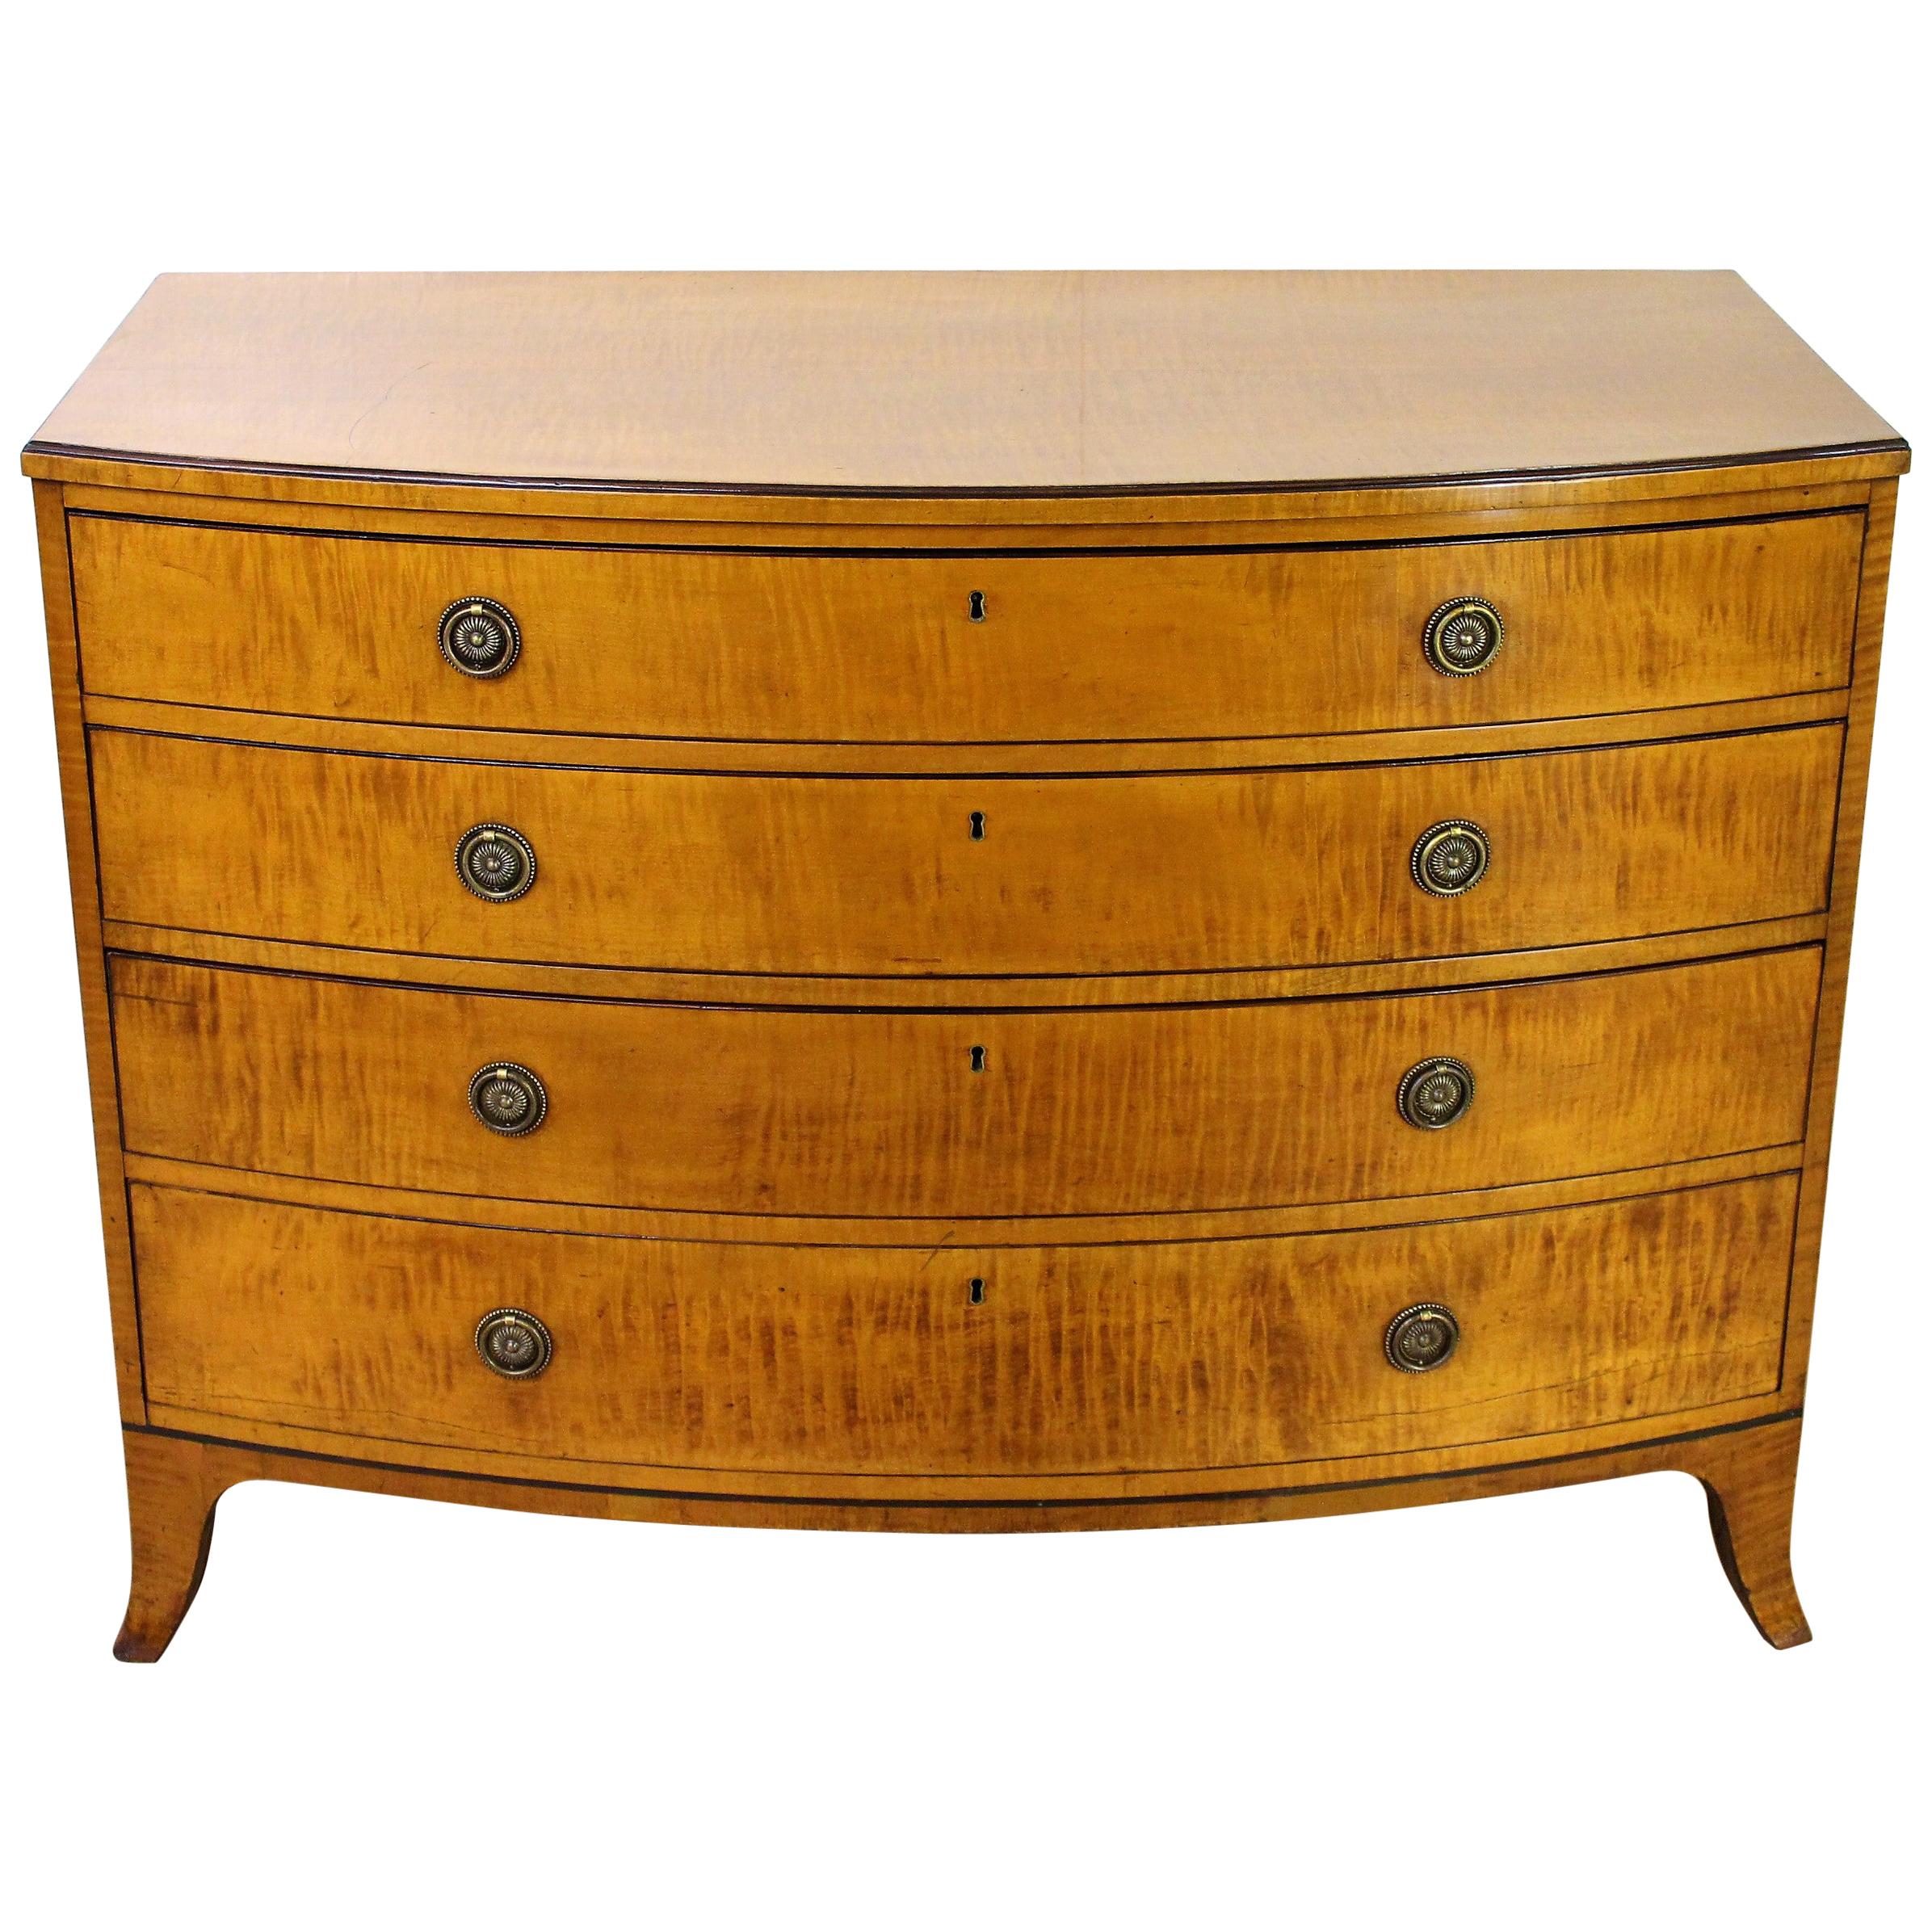 English George III Satinwood Bow Fronted Chest Commode, circa 1790